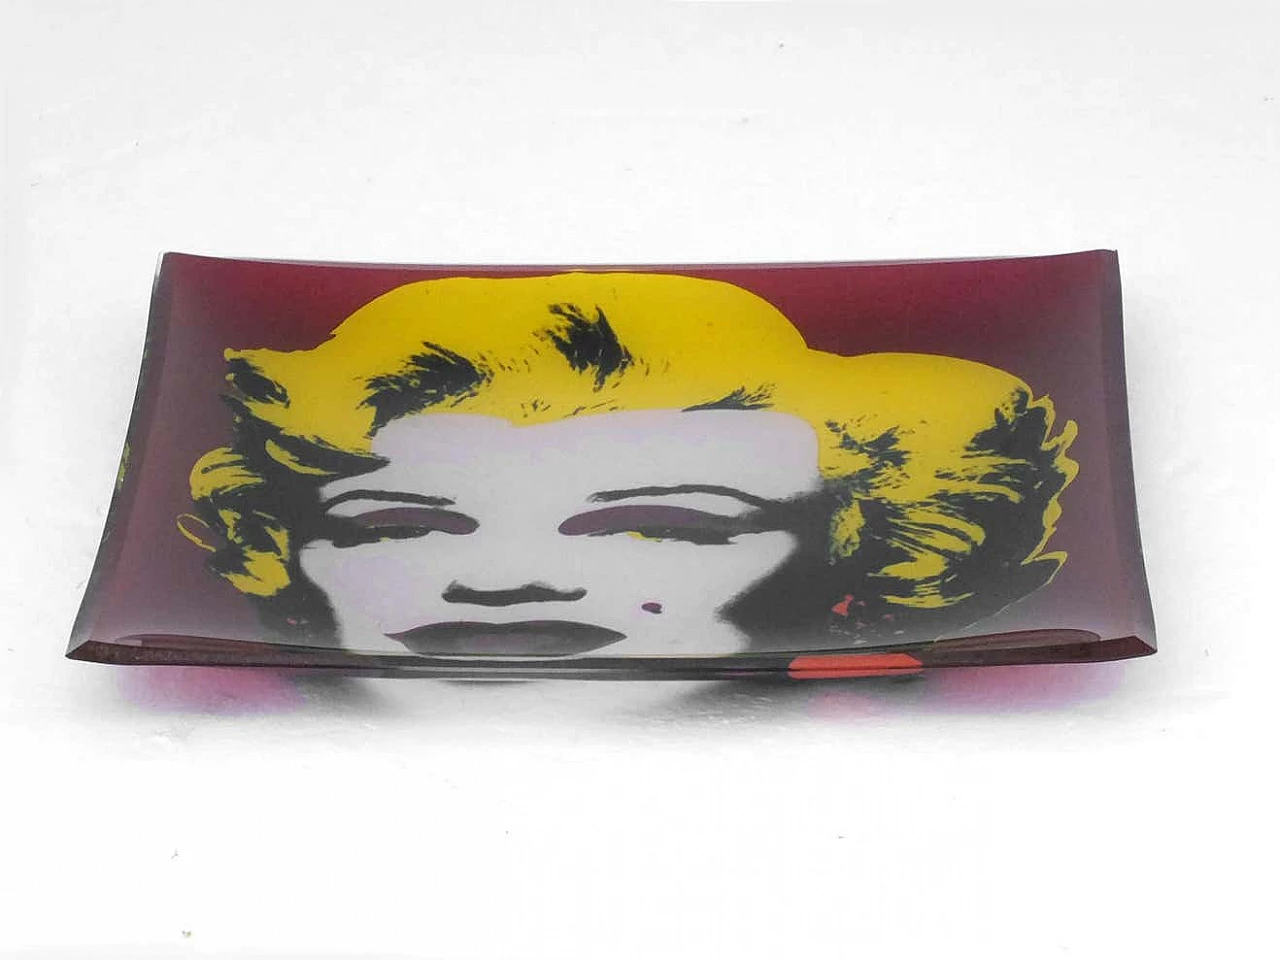 Marilyn Monroe square plate in glass by Andy Warhol for Rosenthal, 1980s 3